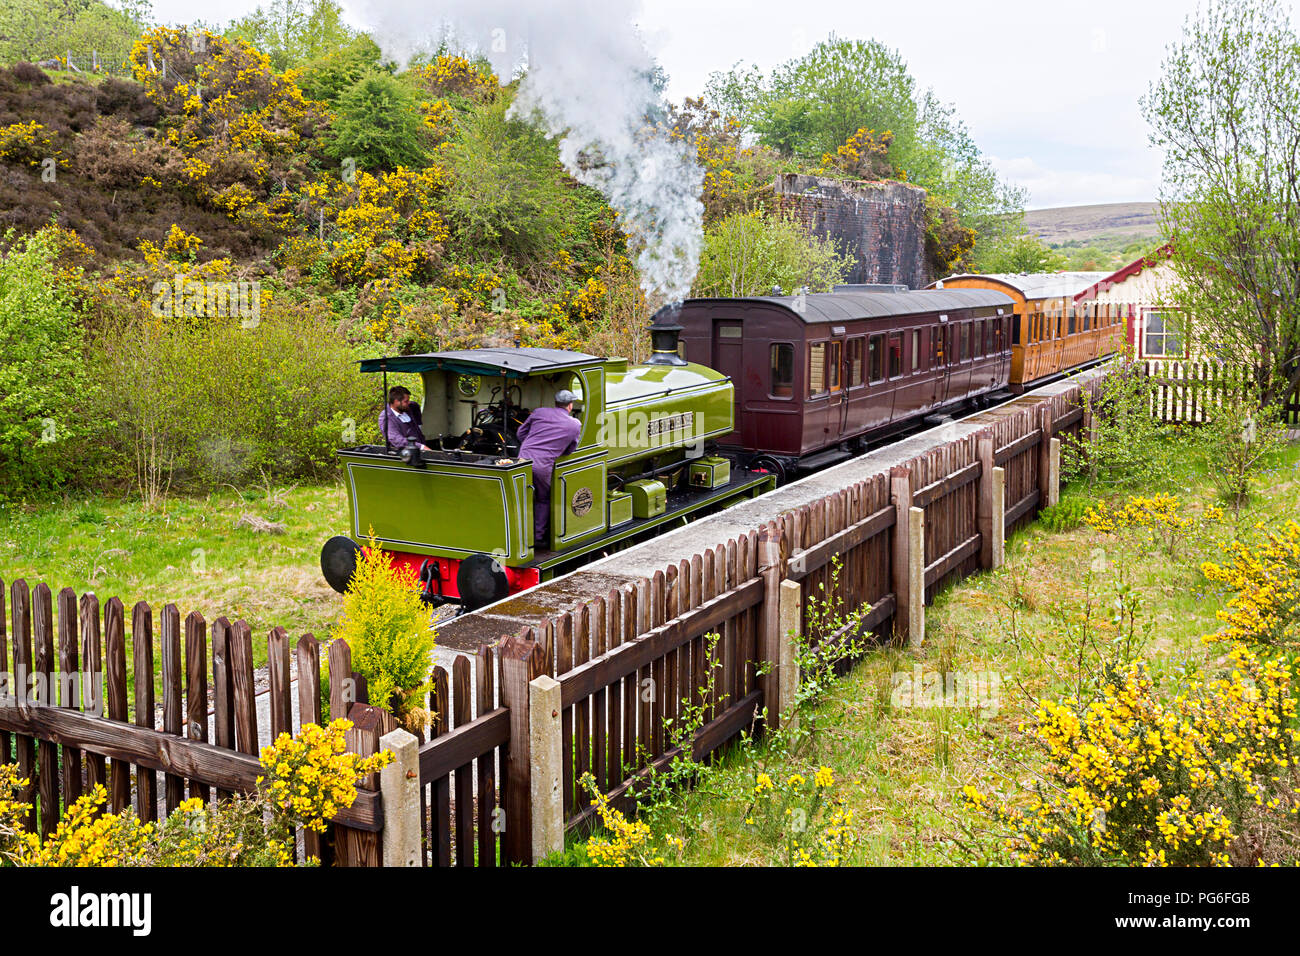 Rosyth No.1 - a 1914 Andrew Barclay 0-4-0ST leaves Big Pit Halt with vintage railway carriages on the Pontypool & Blaenavon Railway, Gwent, Wales, UK Stock Photo